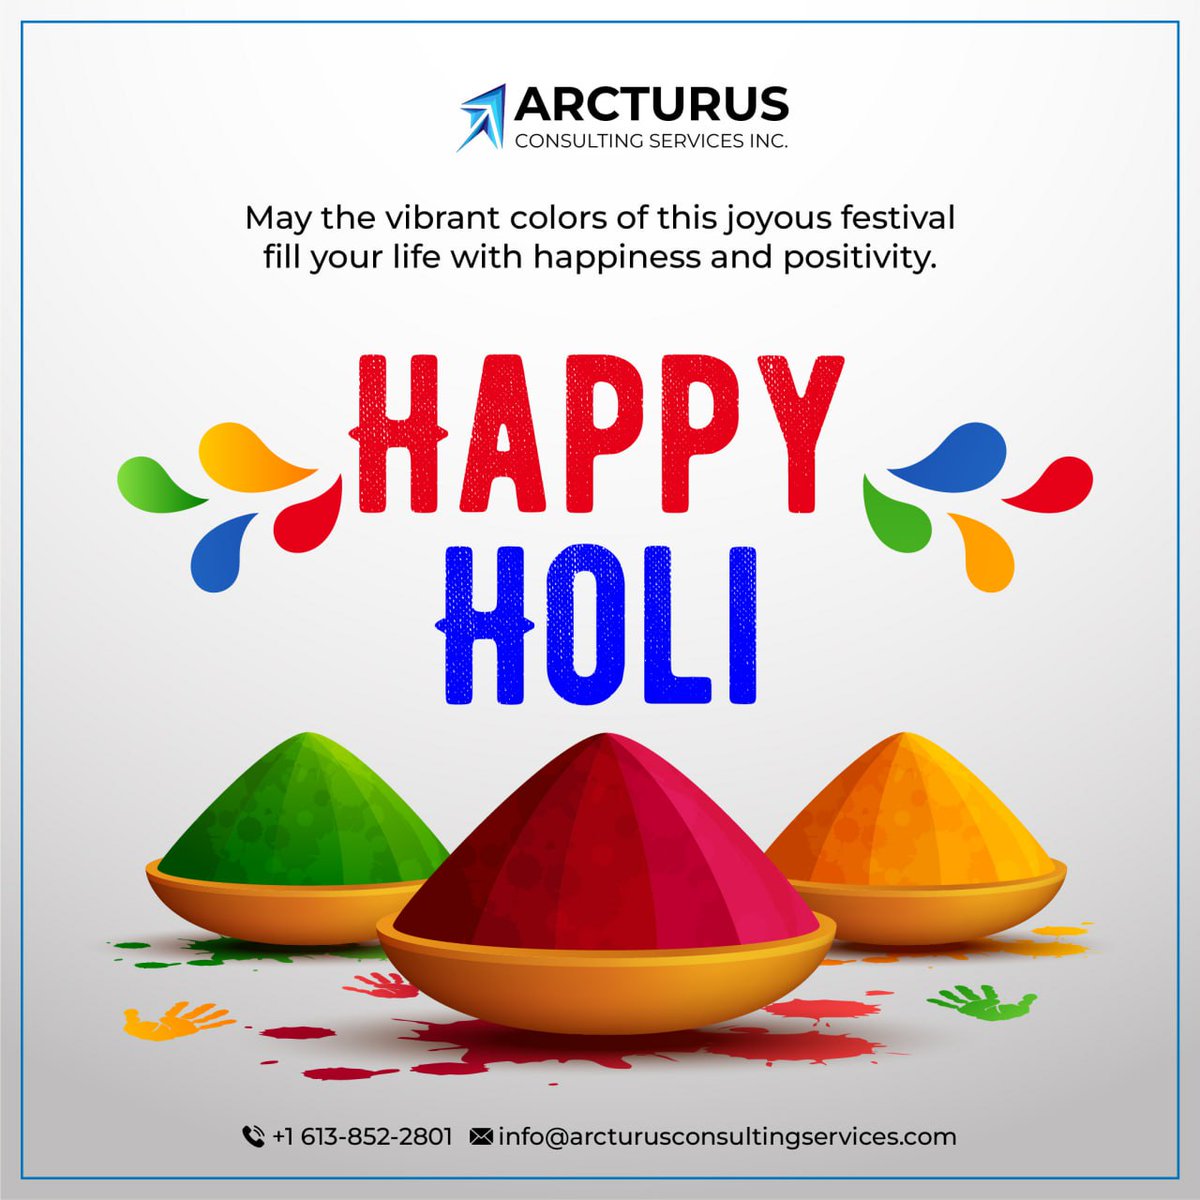 Colorful greetings on this joyous occasion of Holi! May your life be as vibrant and cheerful as the colors of this festival. Let's celebrate the spirit of togetherness and spread happiness all around. #holi #festivalofcolors #oracleconsulting #oraclecloudtraining #recruitment